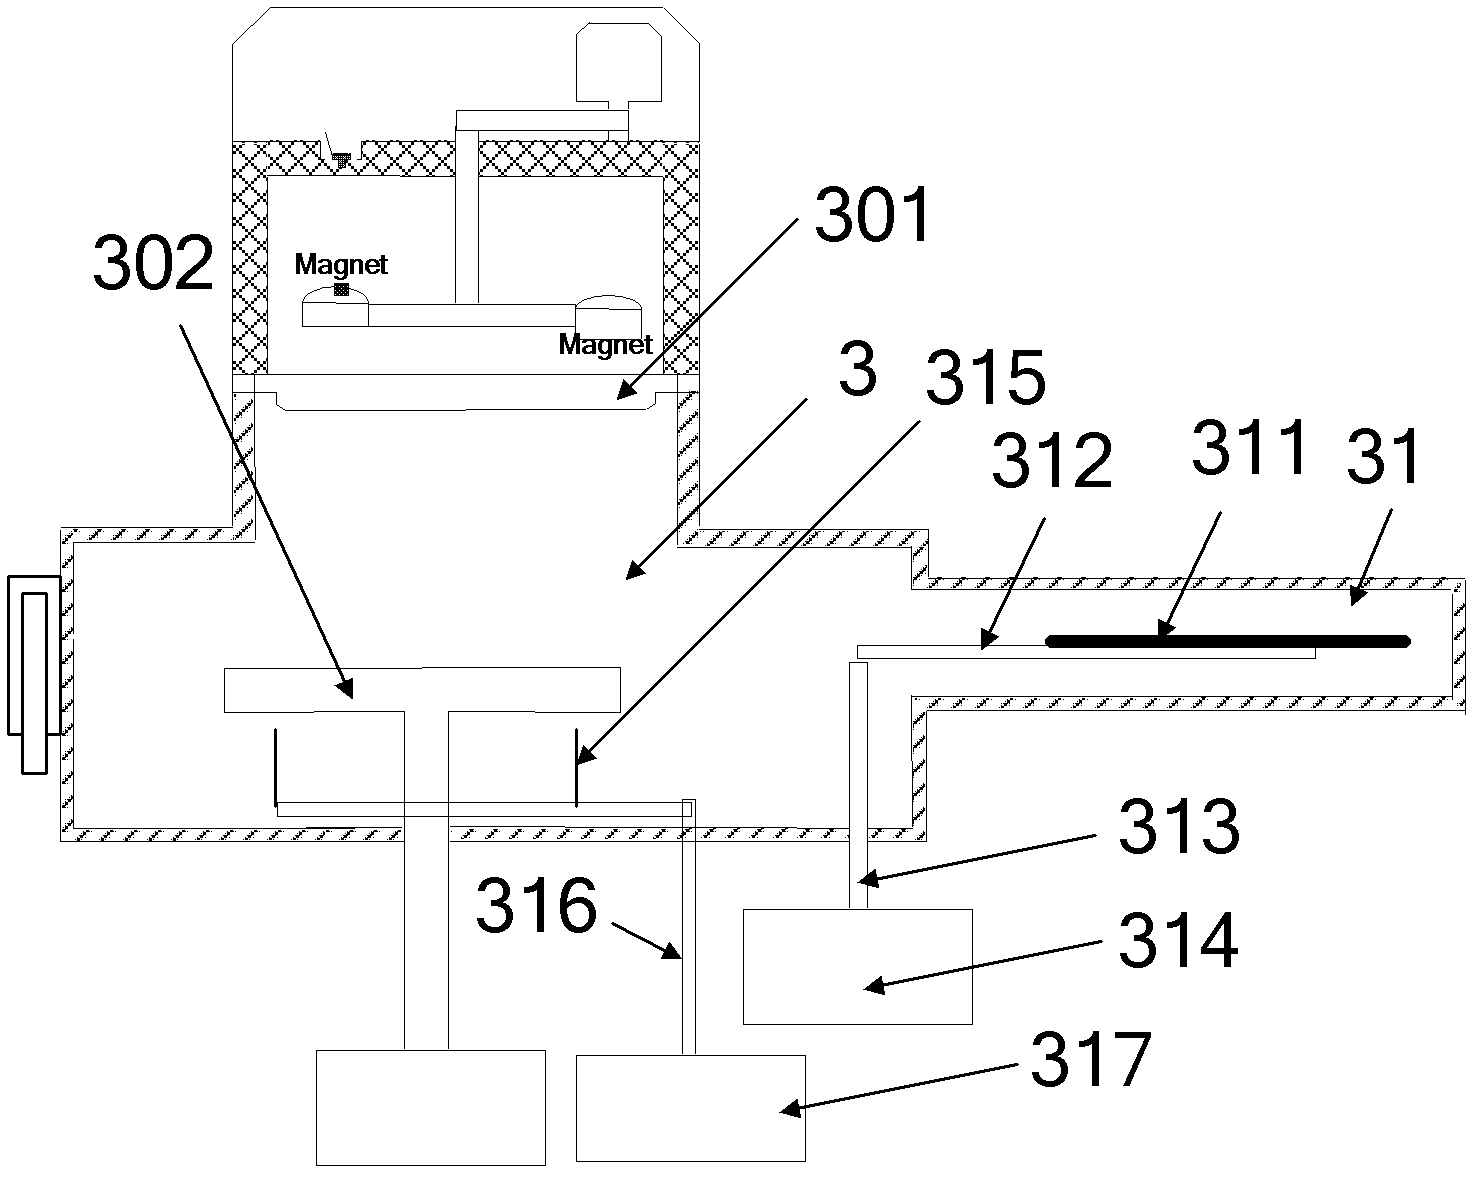 Magnetron sputtering apparatus and process